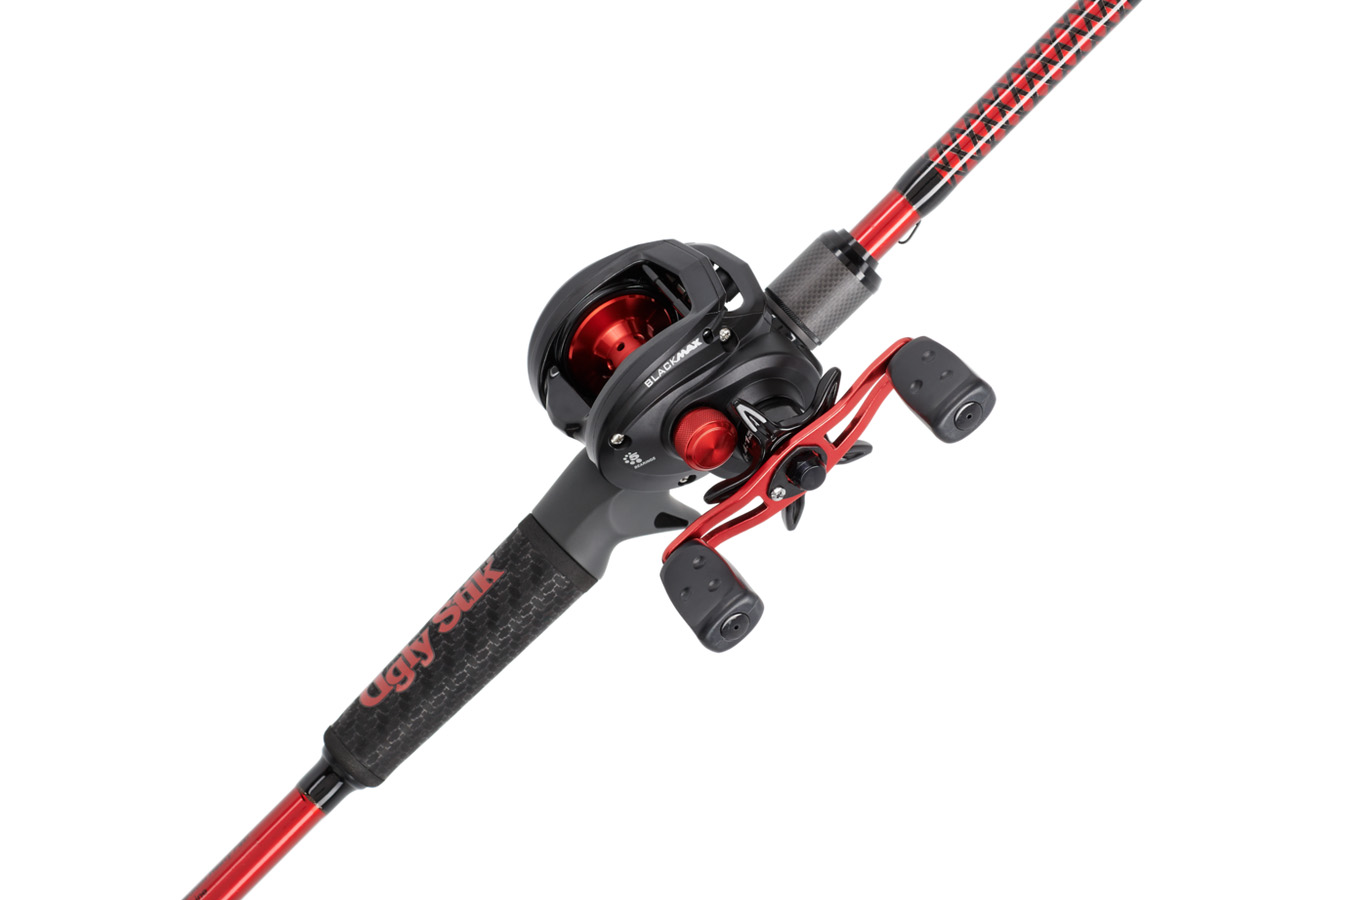 Discount Shakespeare Ugly Stik Carbon 7ft 6.4:1 Baitcast Combo MH Left  Handed for Sale, Online Fishing Rod/Reel Combo Store